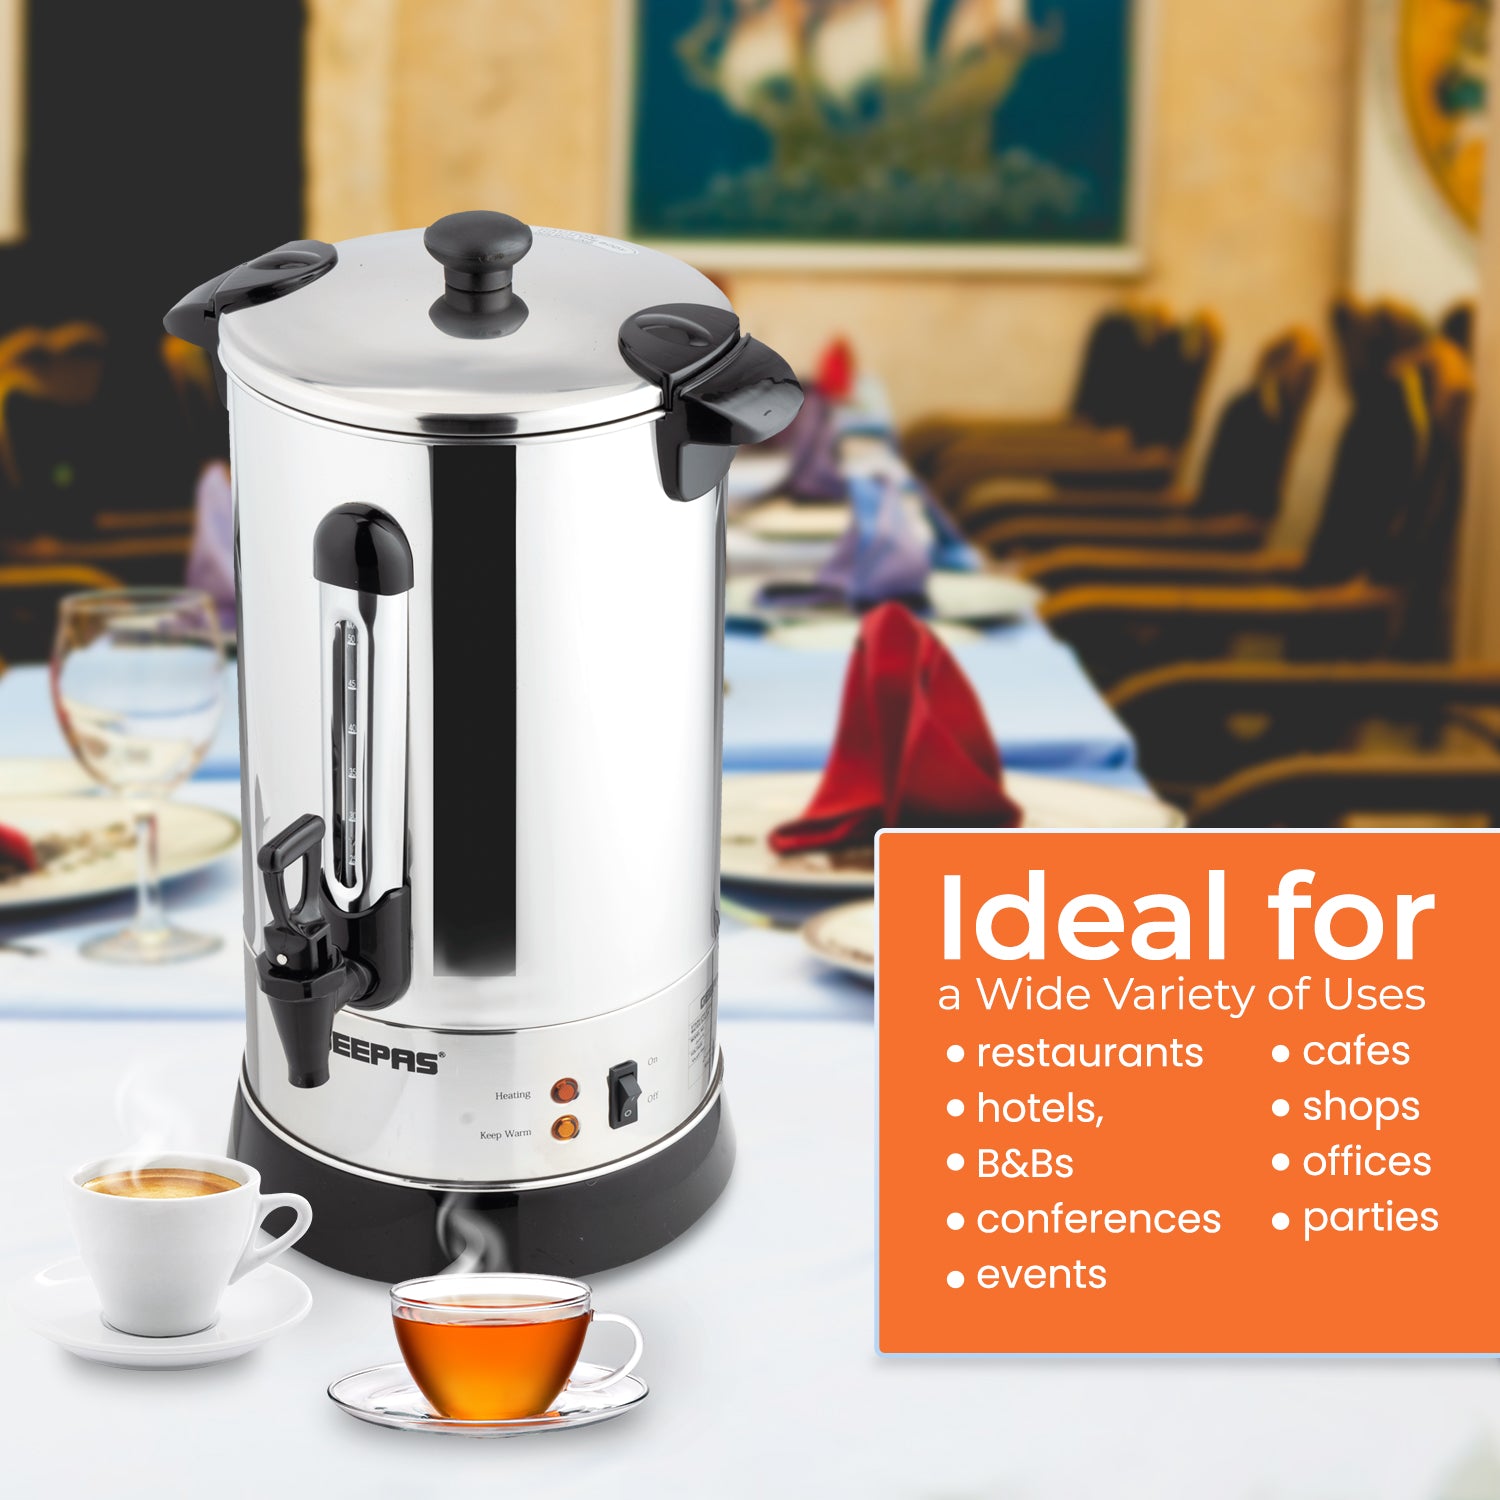 image shows off the commercial, hospitality and catering purposes of the electric urn.